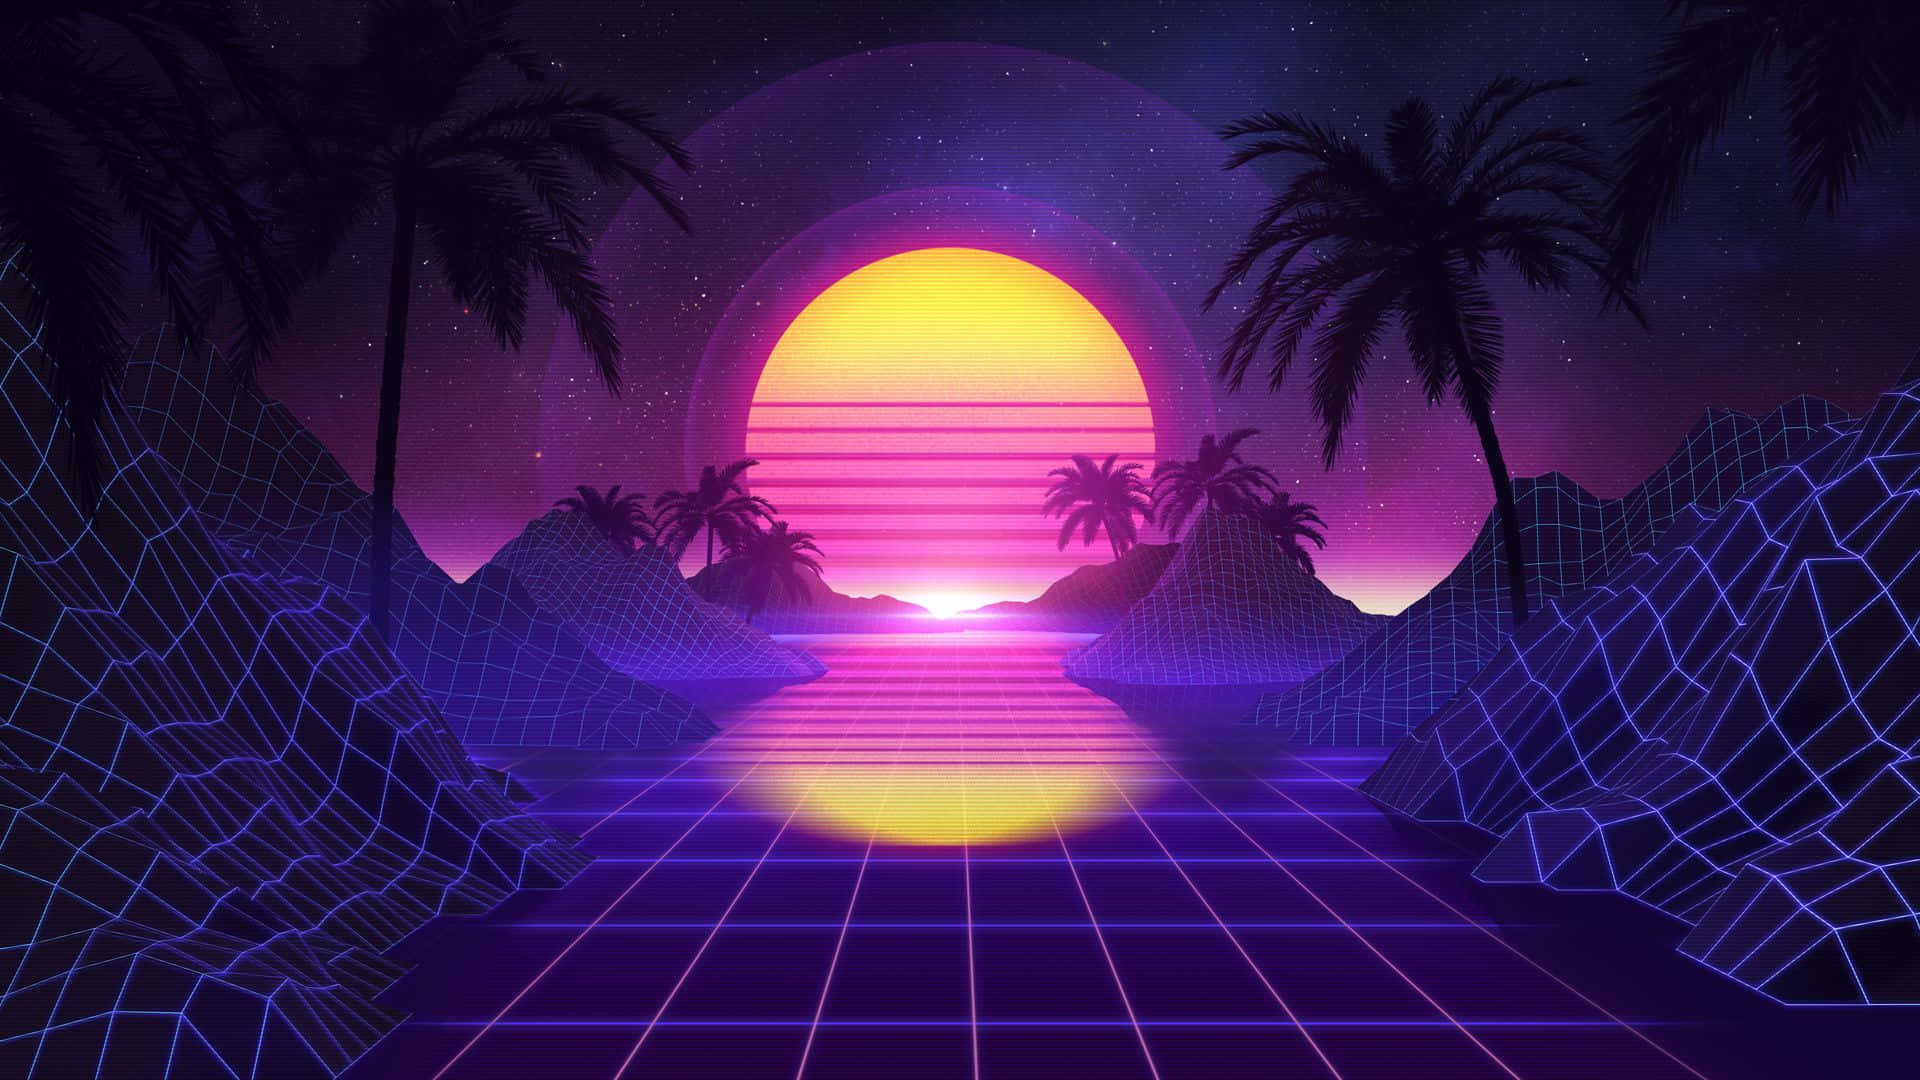 Experience the futurism of Synthwave